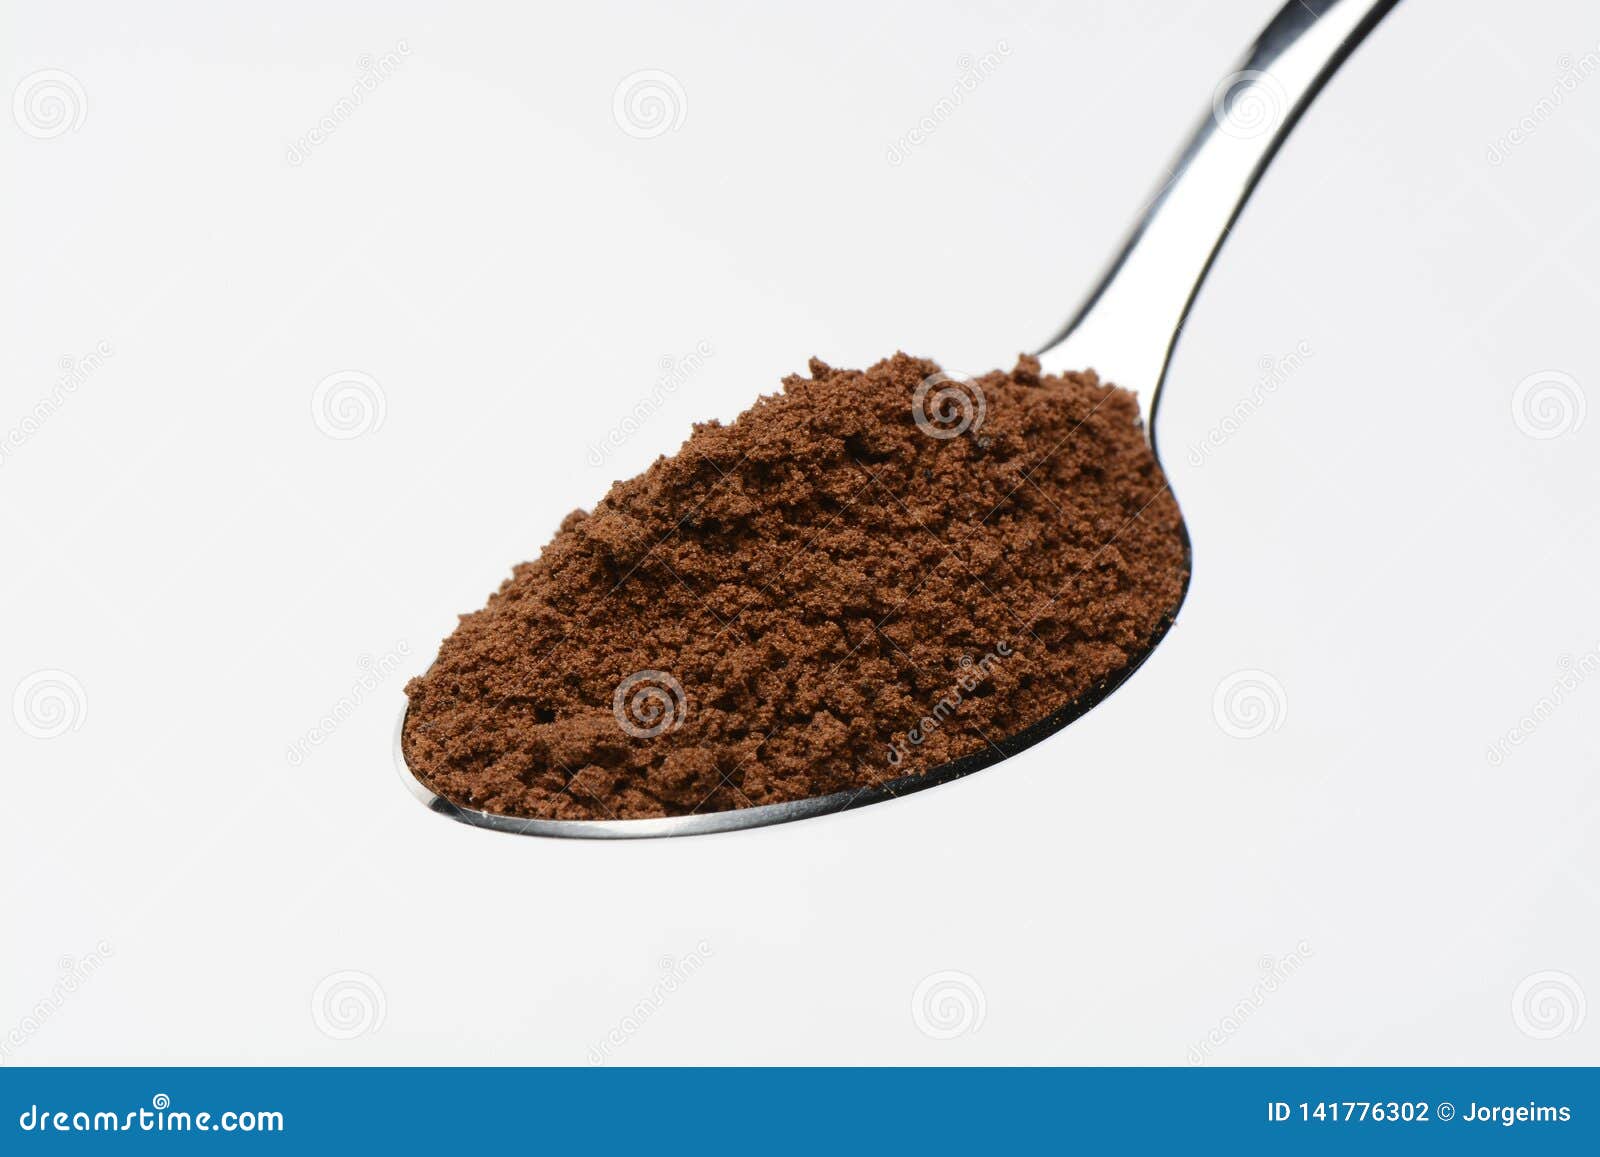 soluble coffee in a spoon